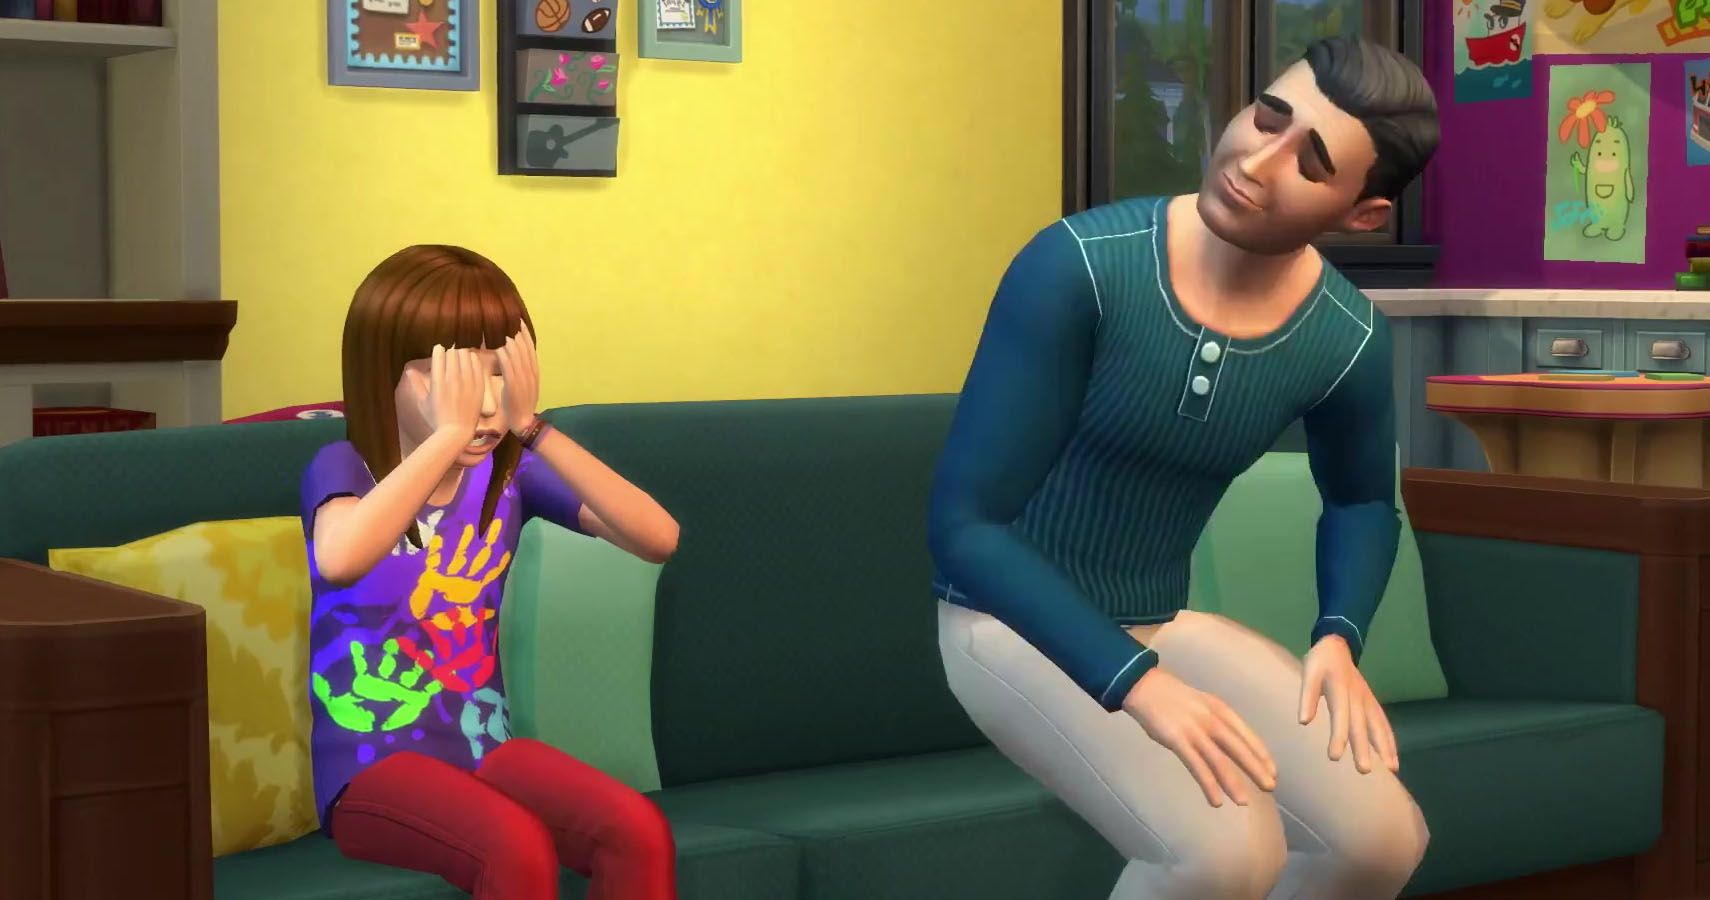 A sim dad playing hide and seek with his child.